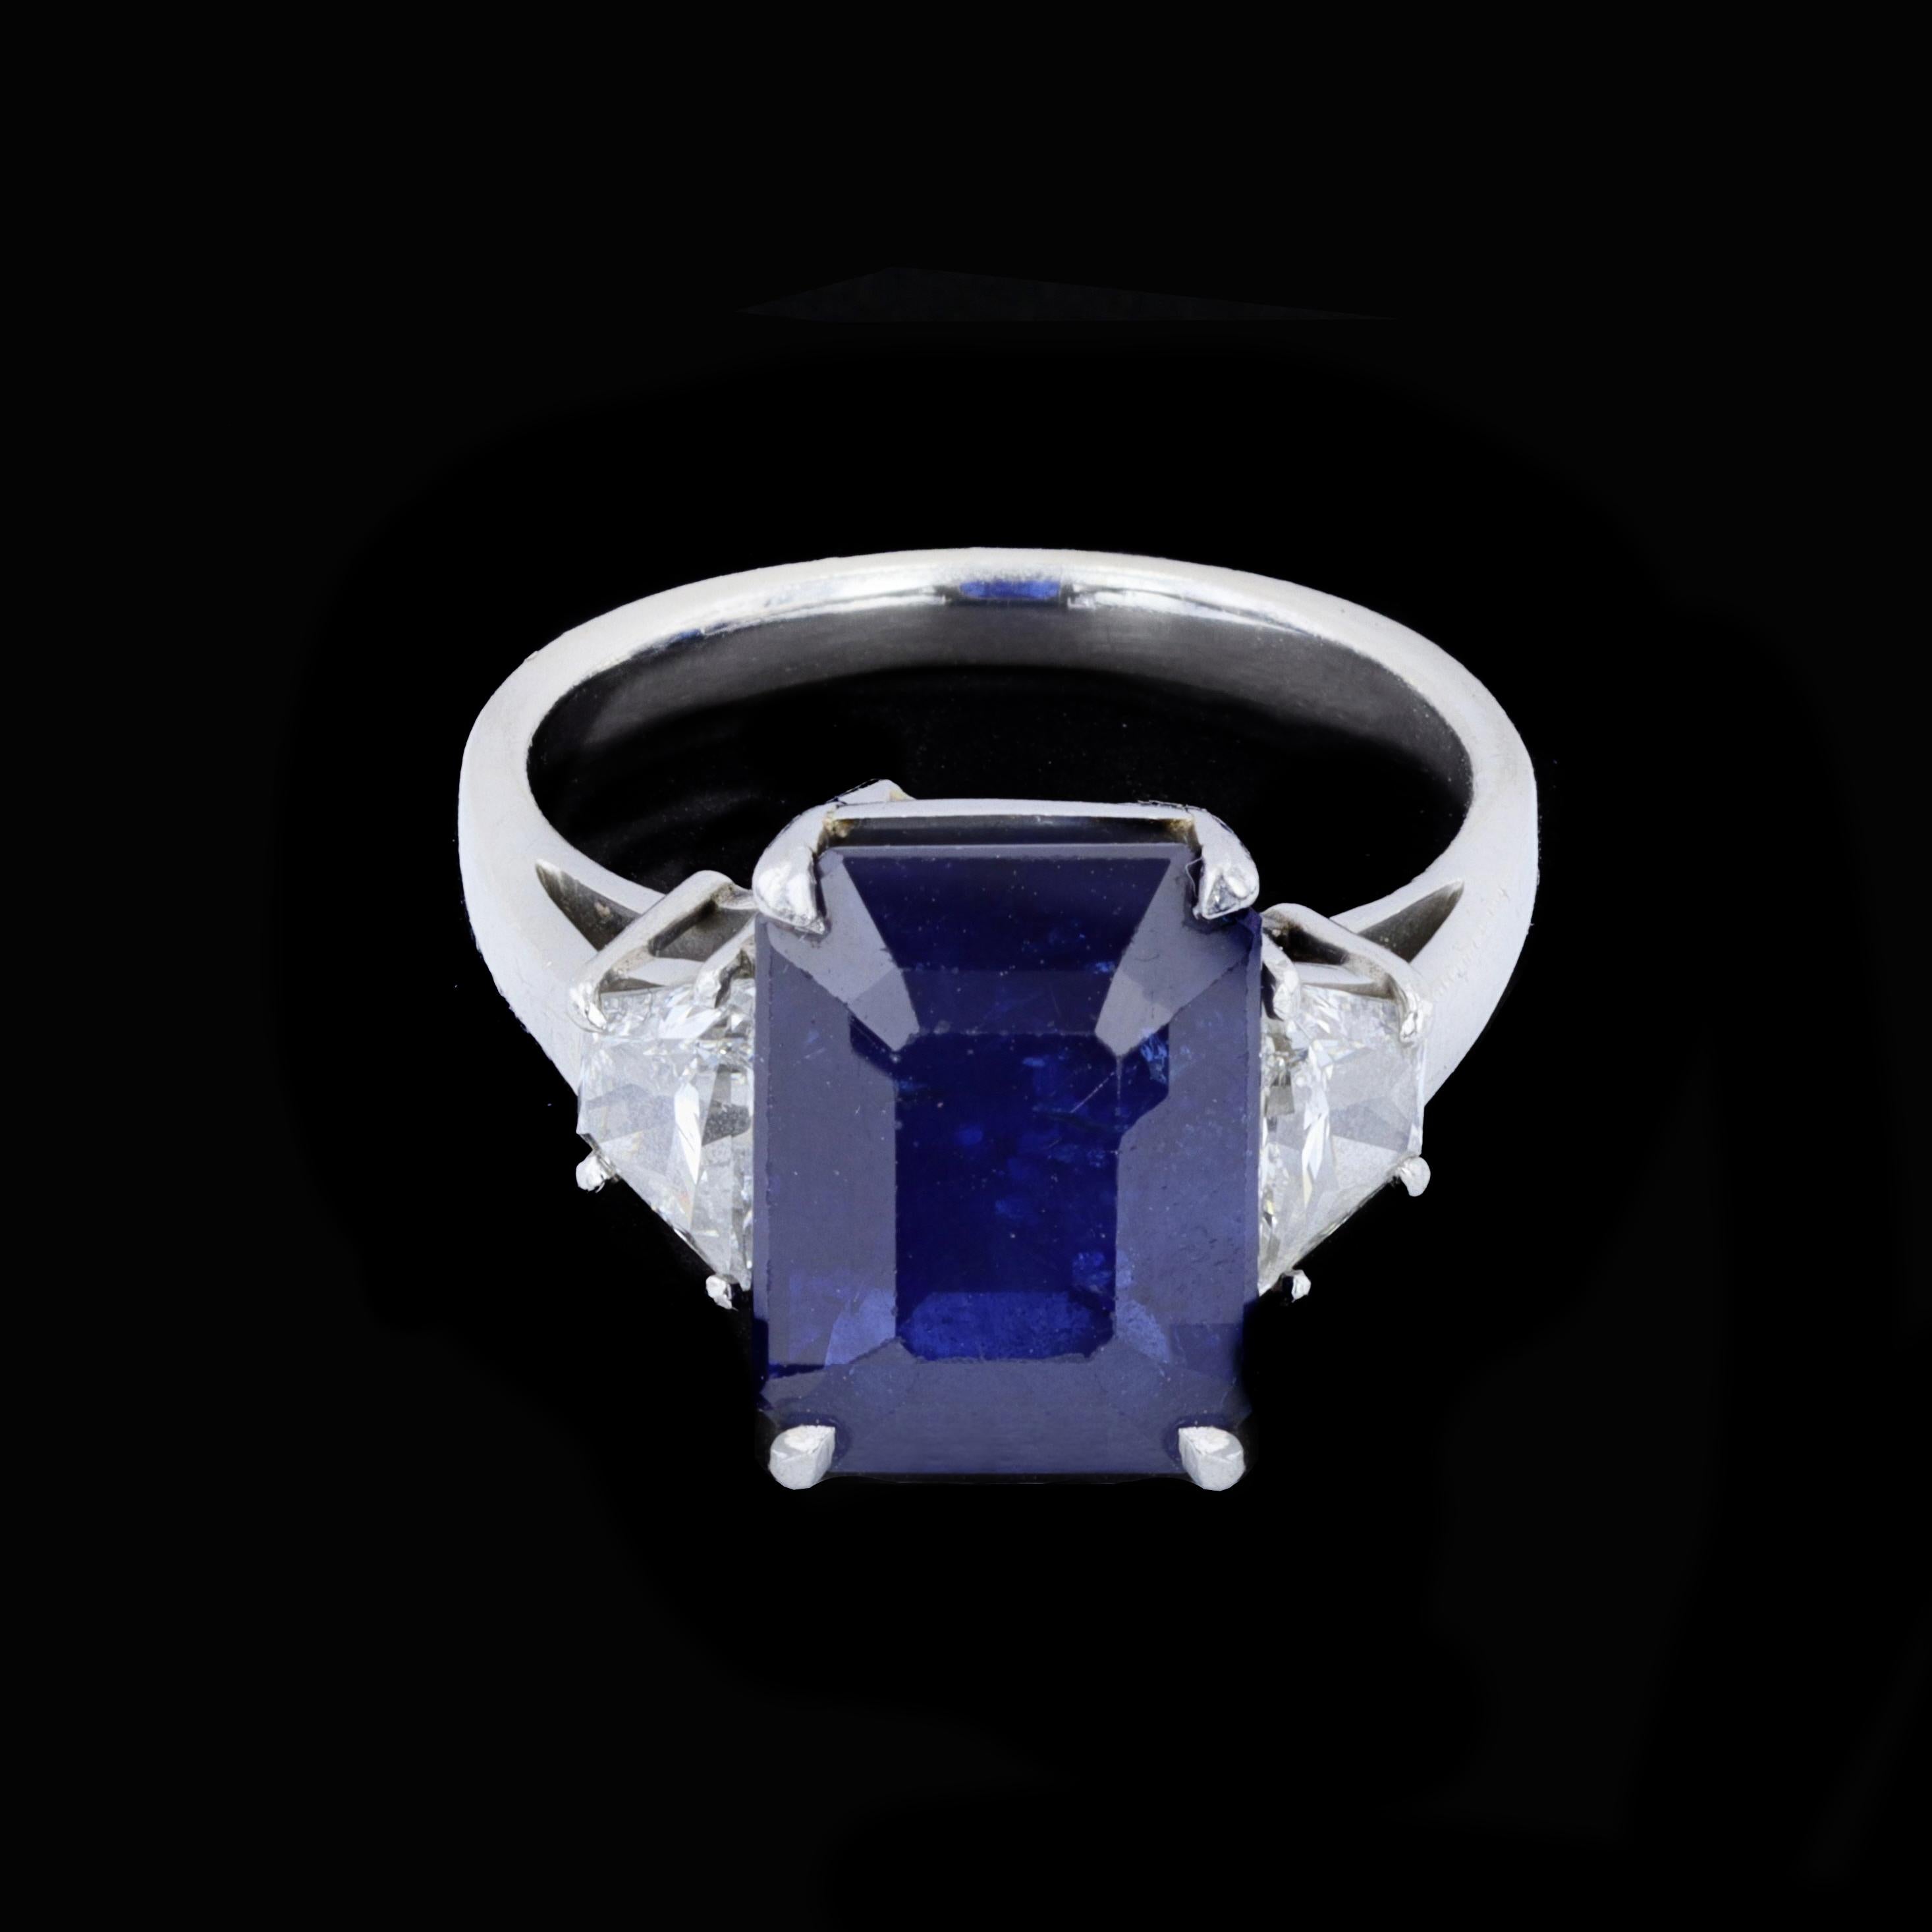 A spectacular three-stone sapphire and diamond vintage ring. The rich blue 7.59ctw emerald cut sapphire is supported by two trapezoid diamonds weighing 0.87 ctw and features a platinum setting.

